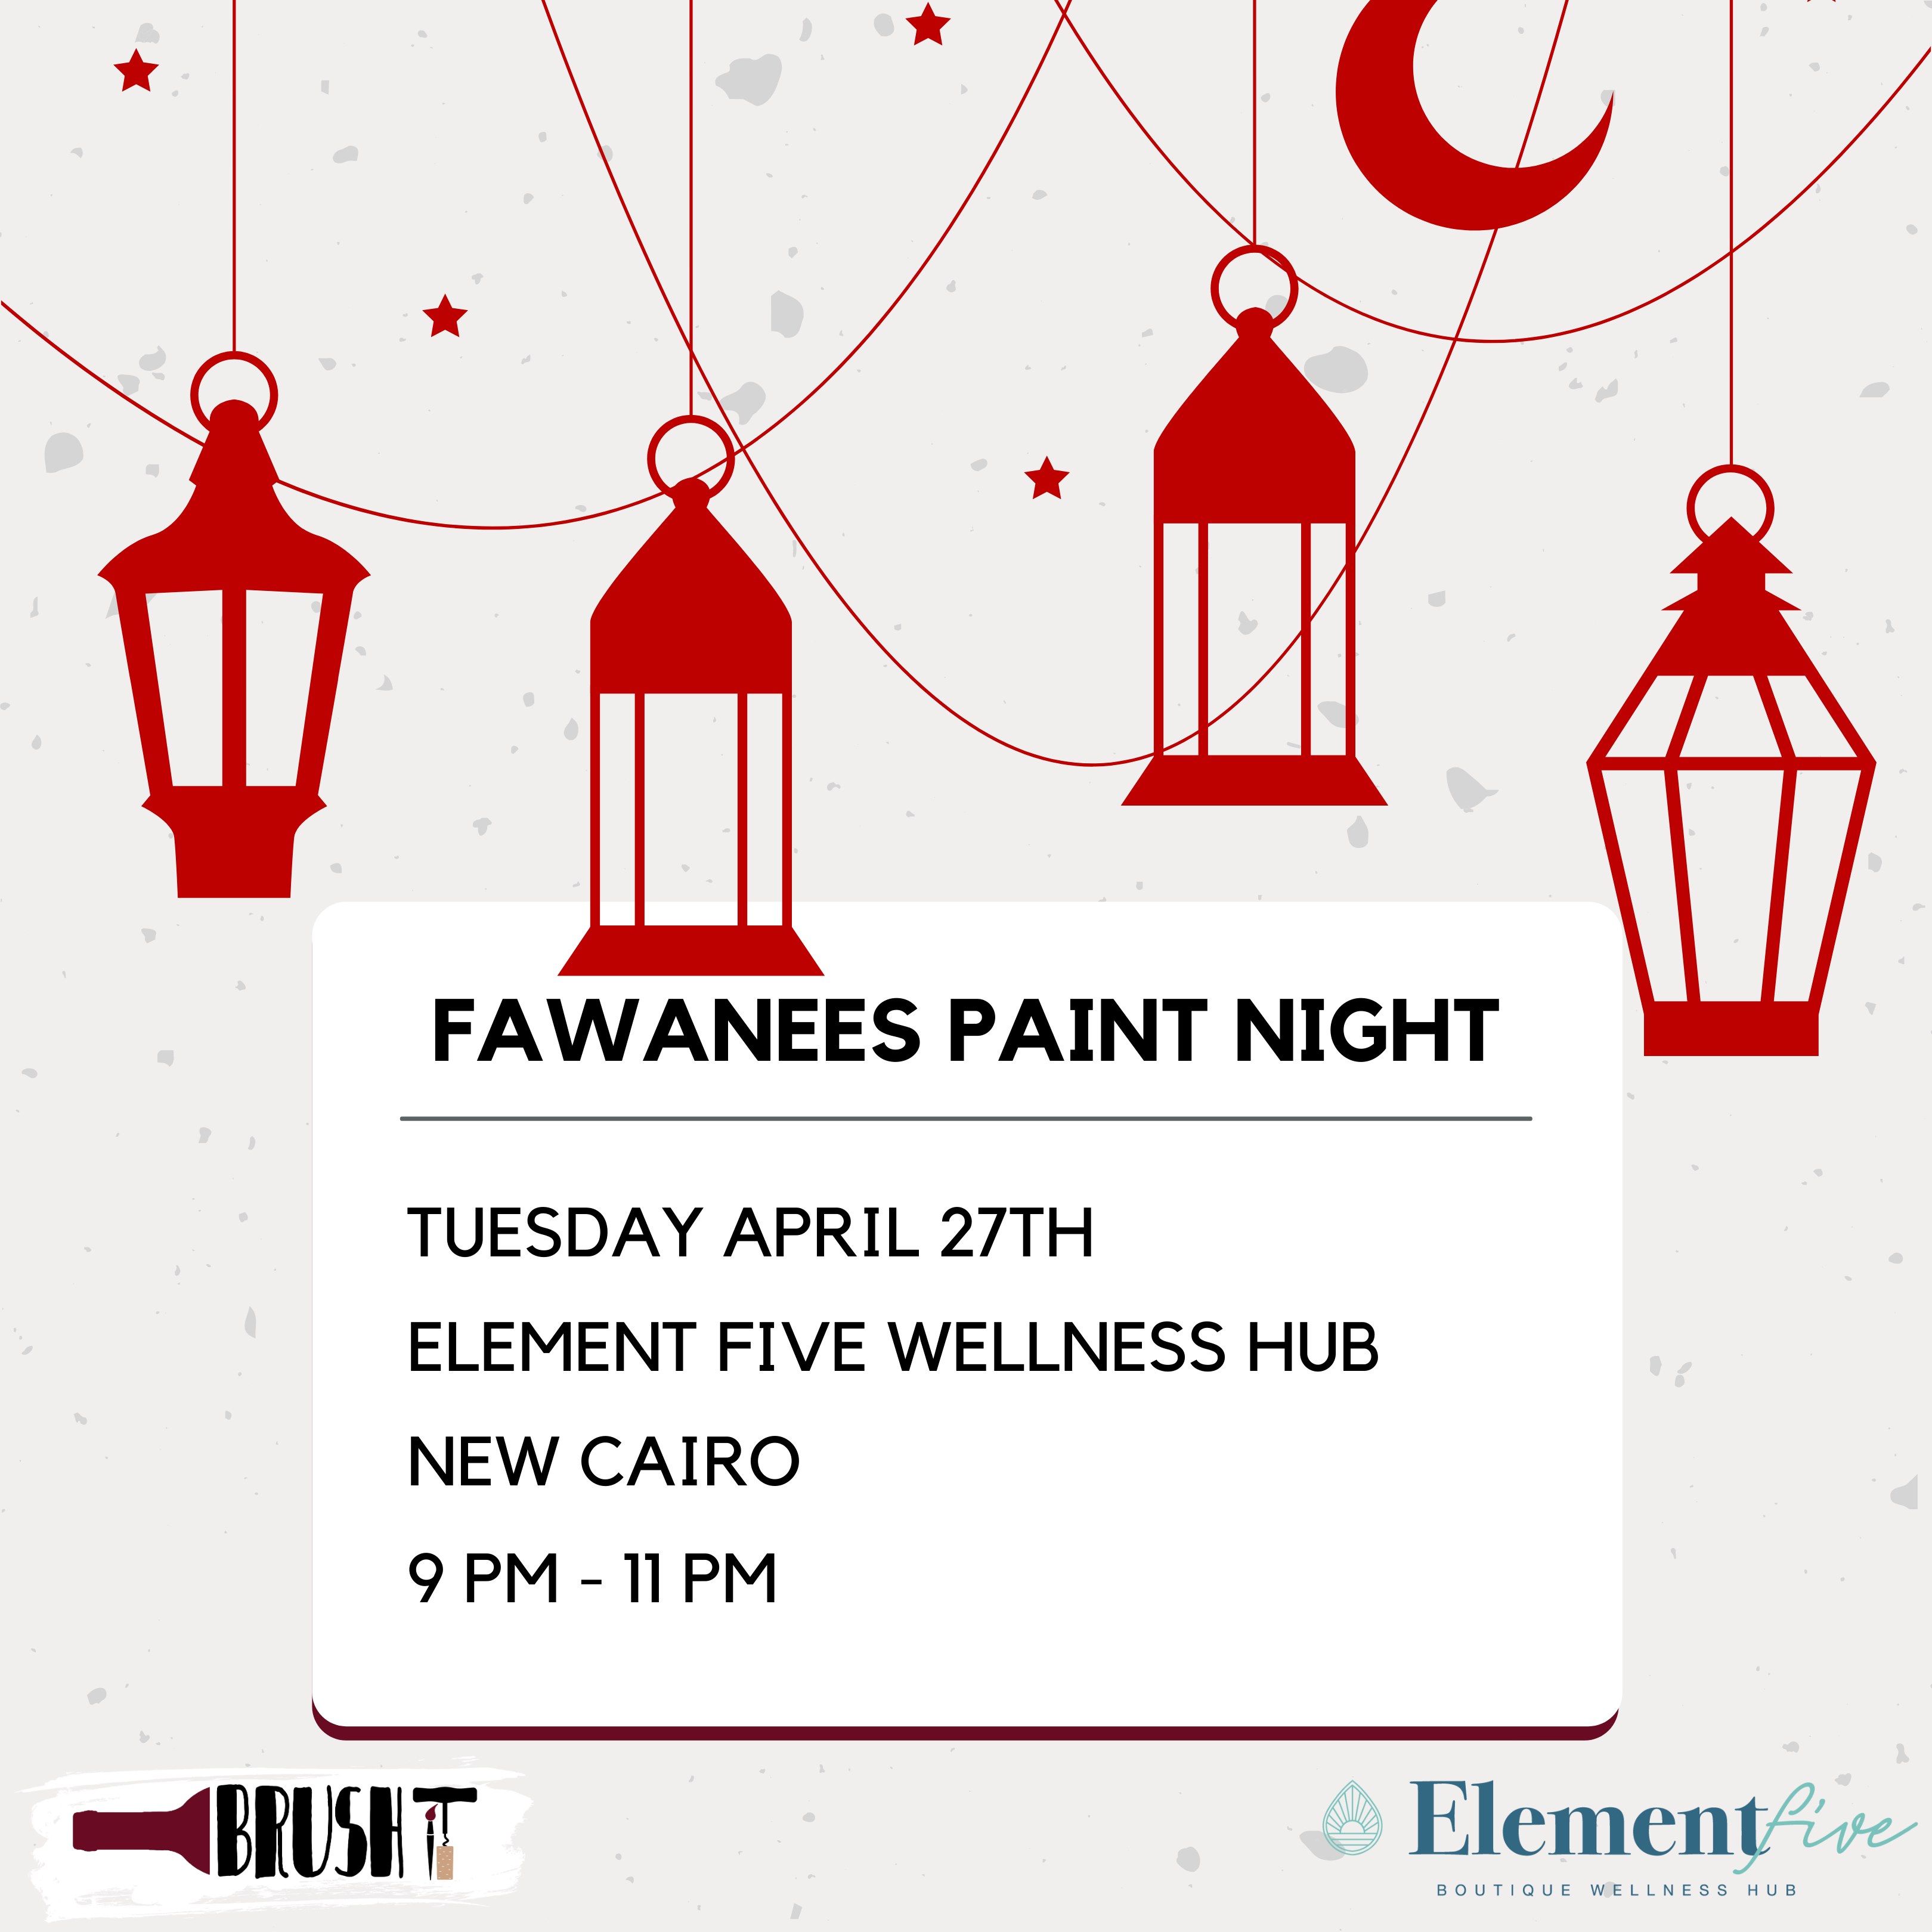 *FAWANEES* TUESDAY, April 27th - 9:00 pm - 11:00 pm - NEW CAIRO - Element Five - Suncity Gardens Compound